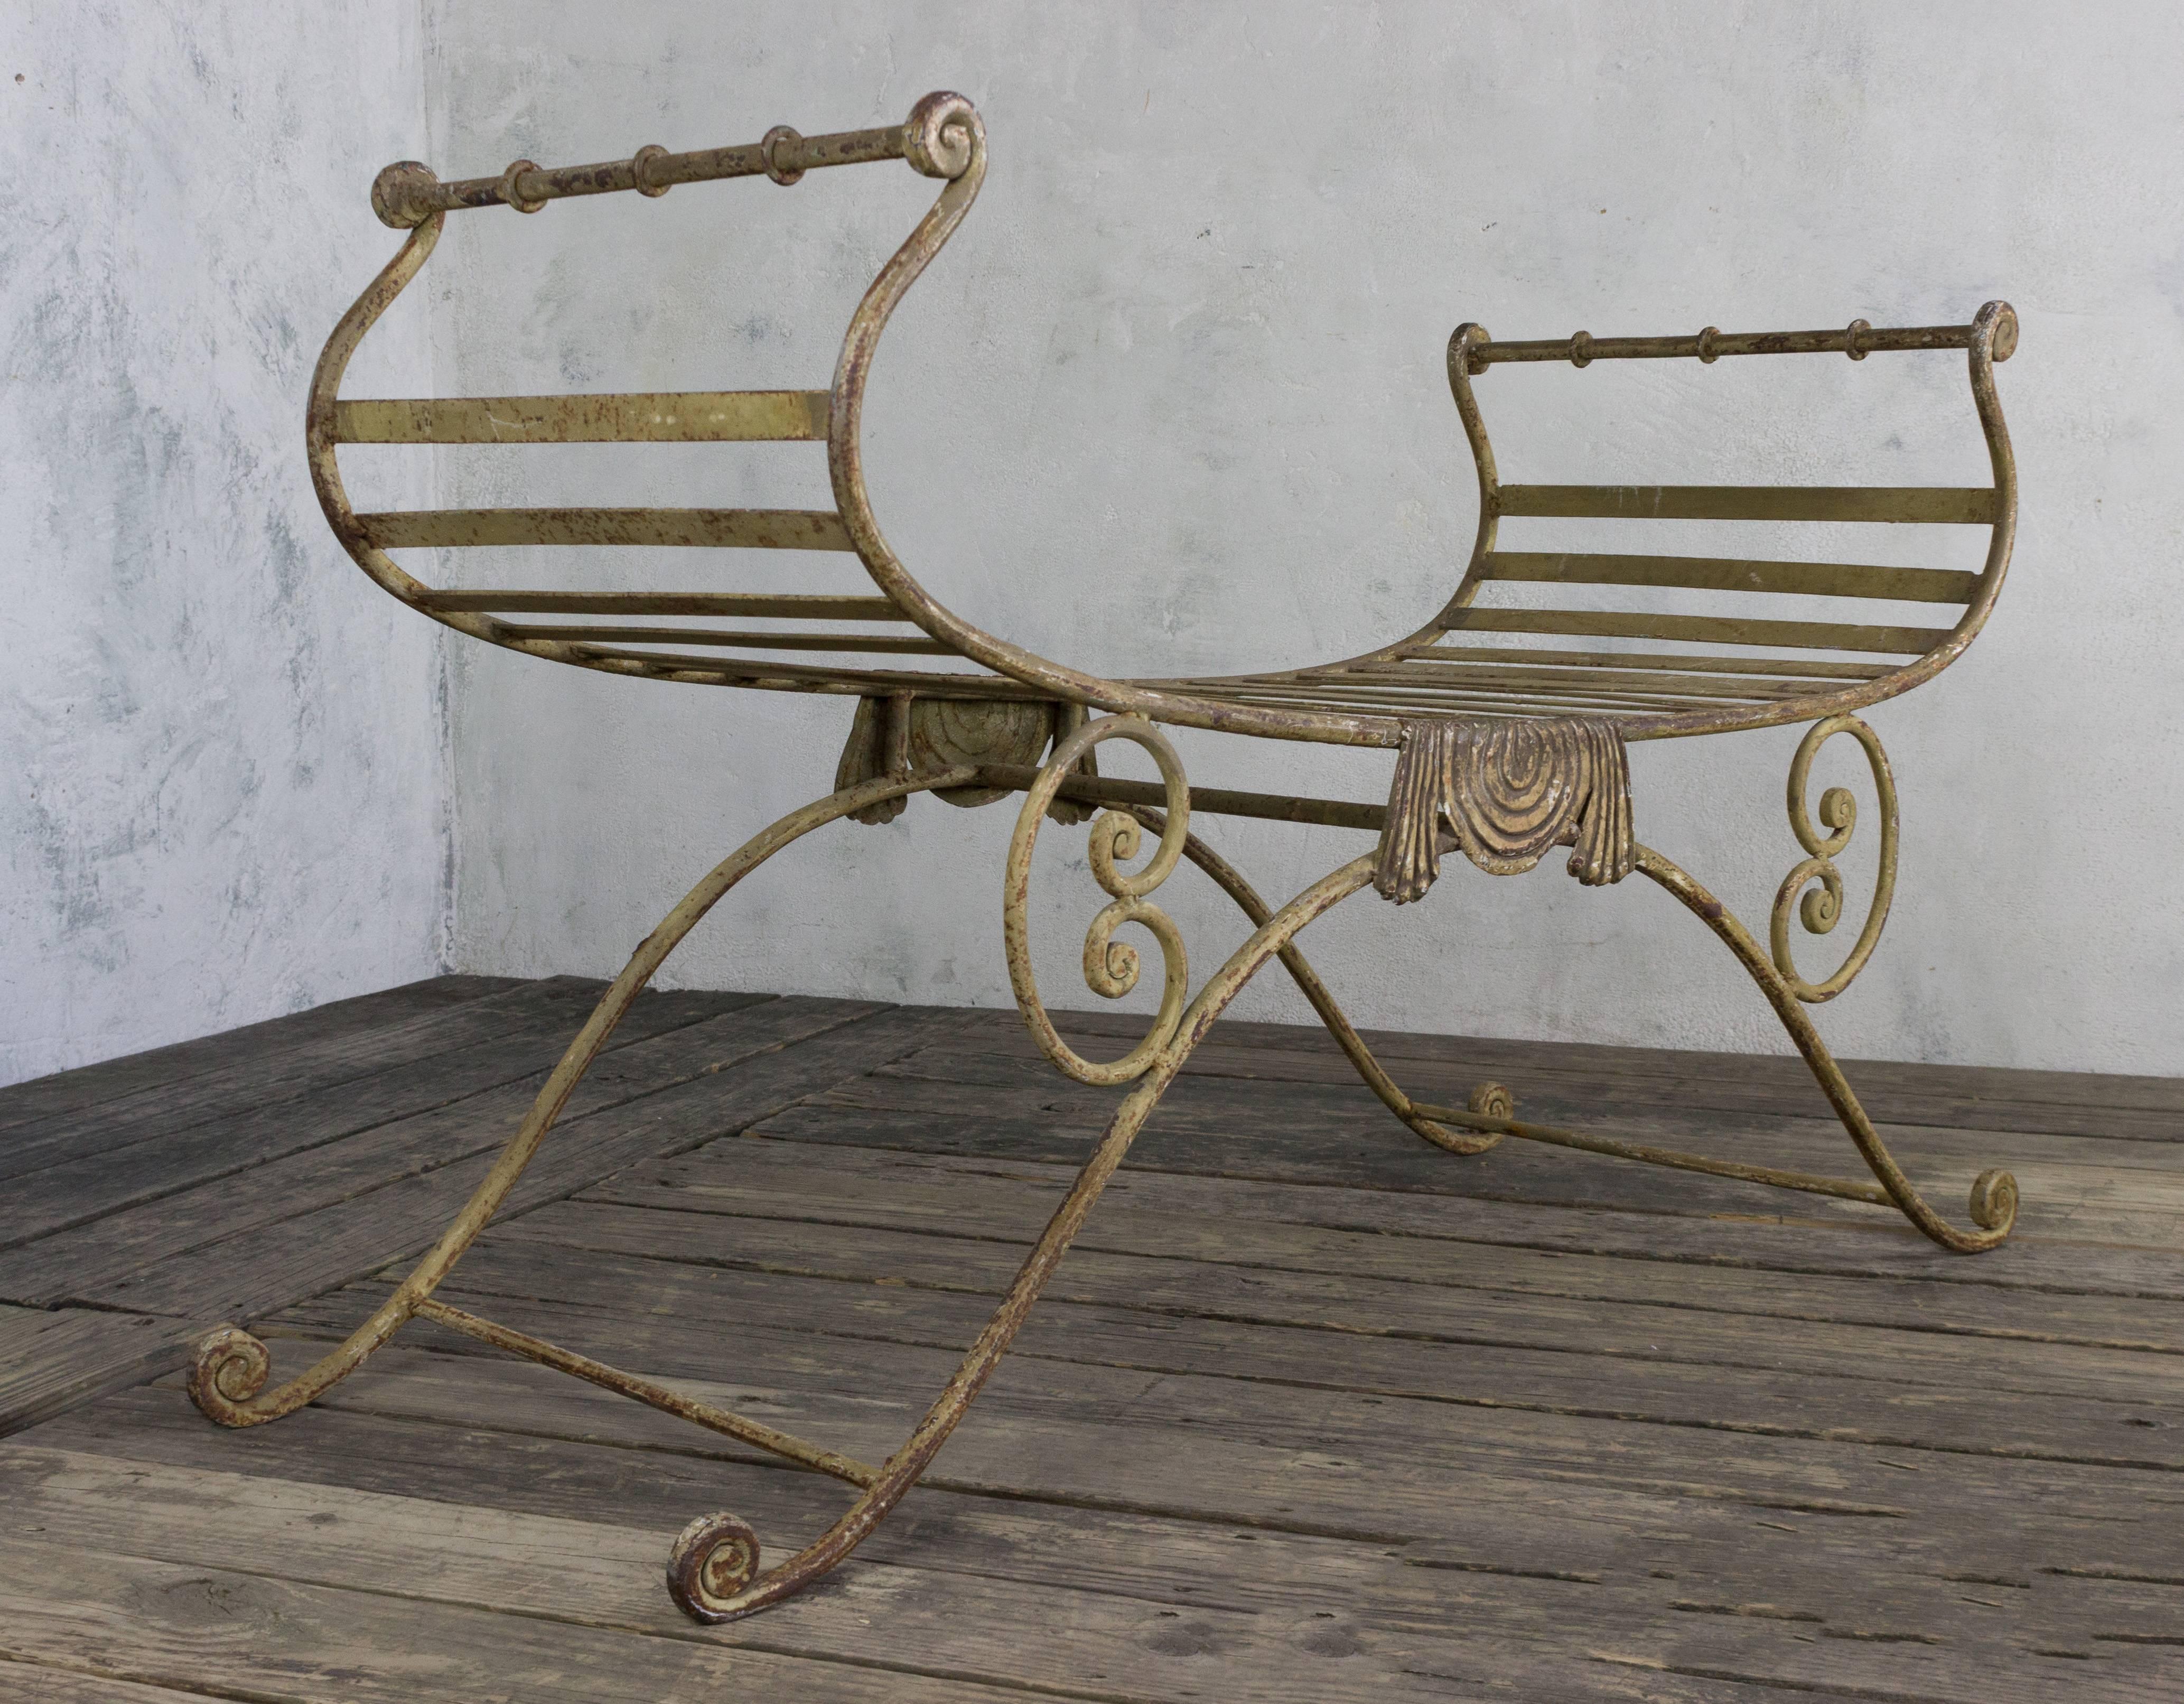 Neoclassic style green wrought iron bench, Italian, early 20th century.